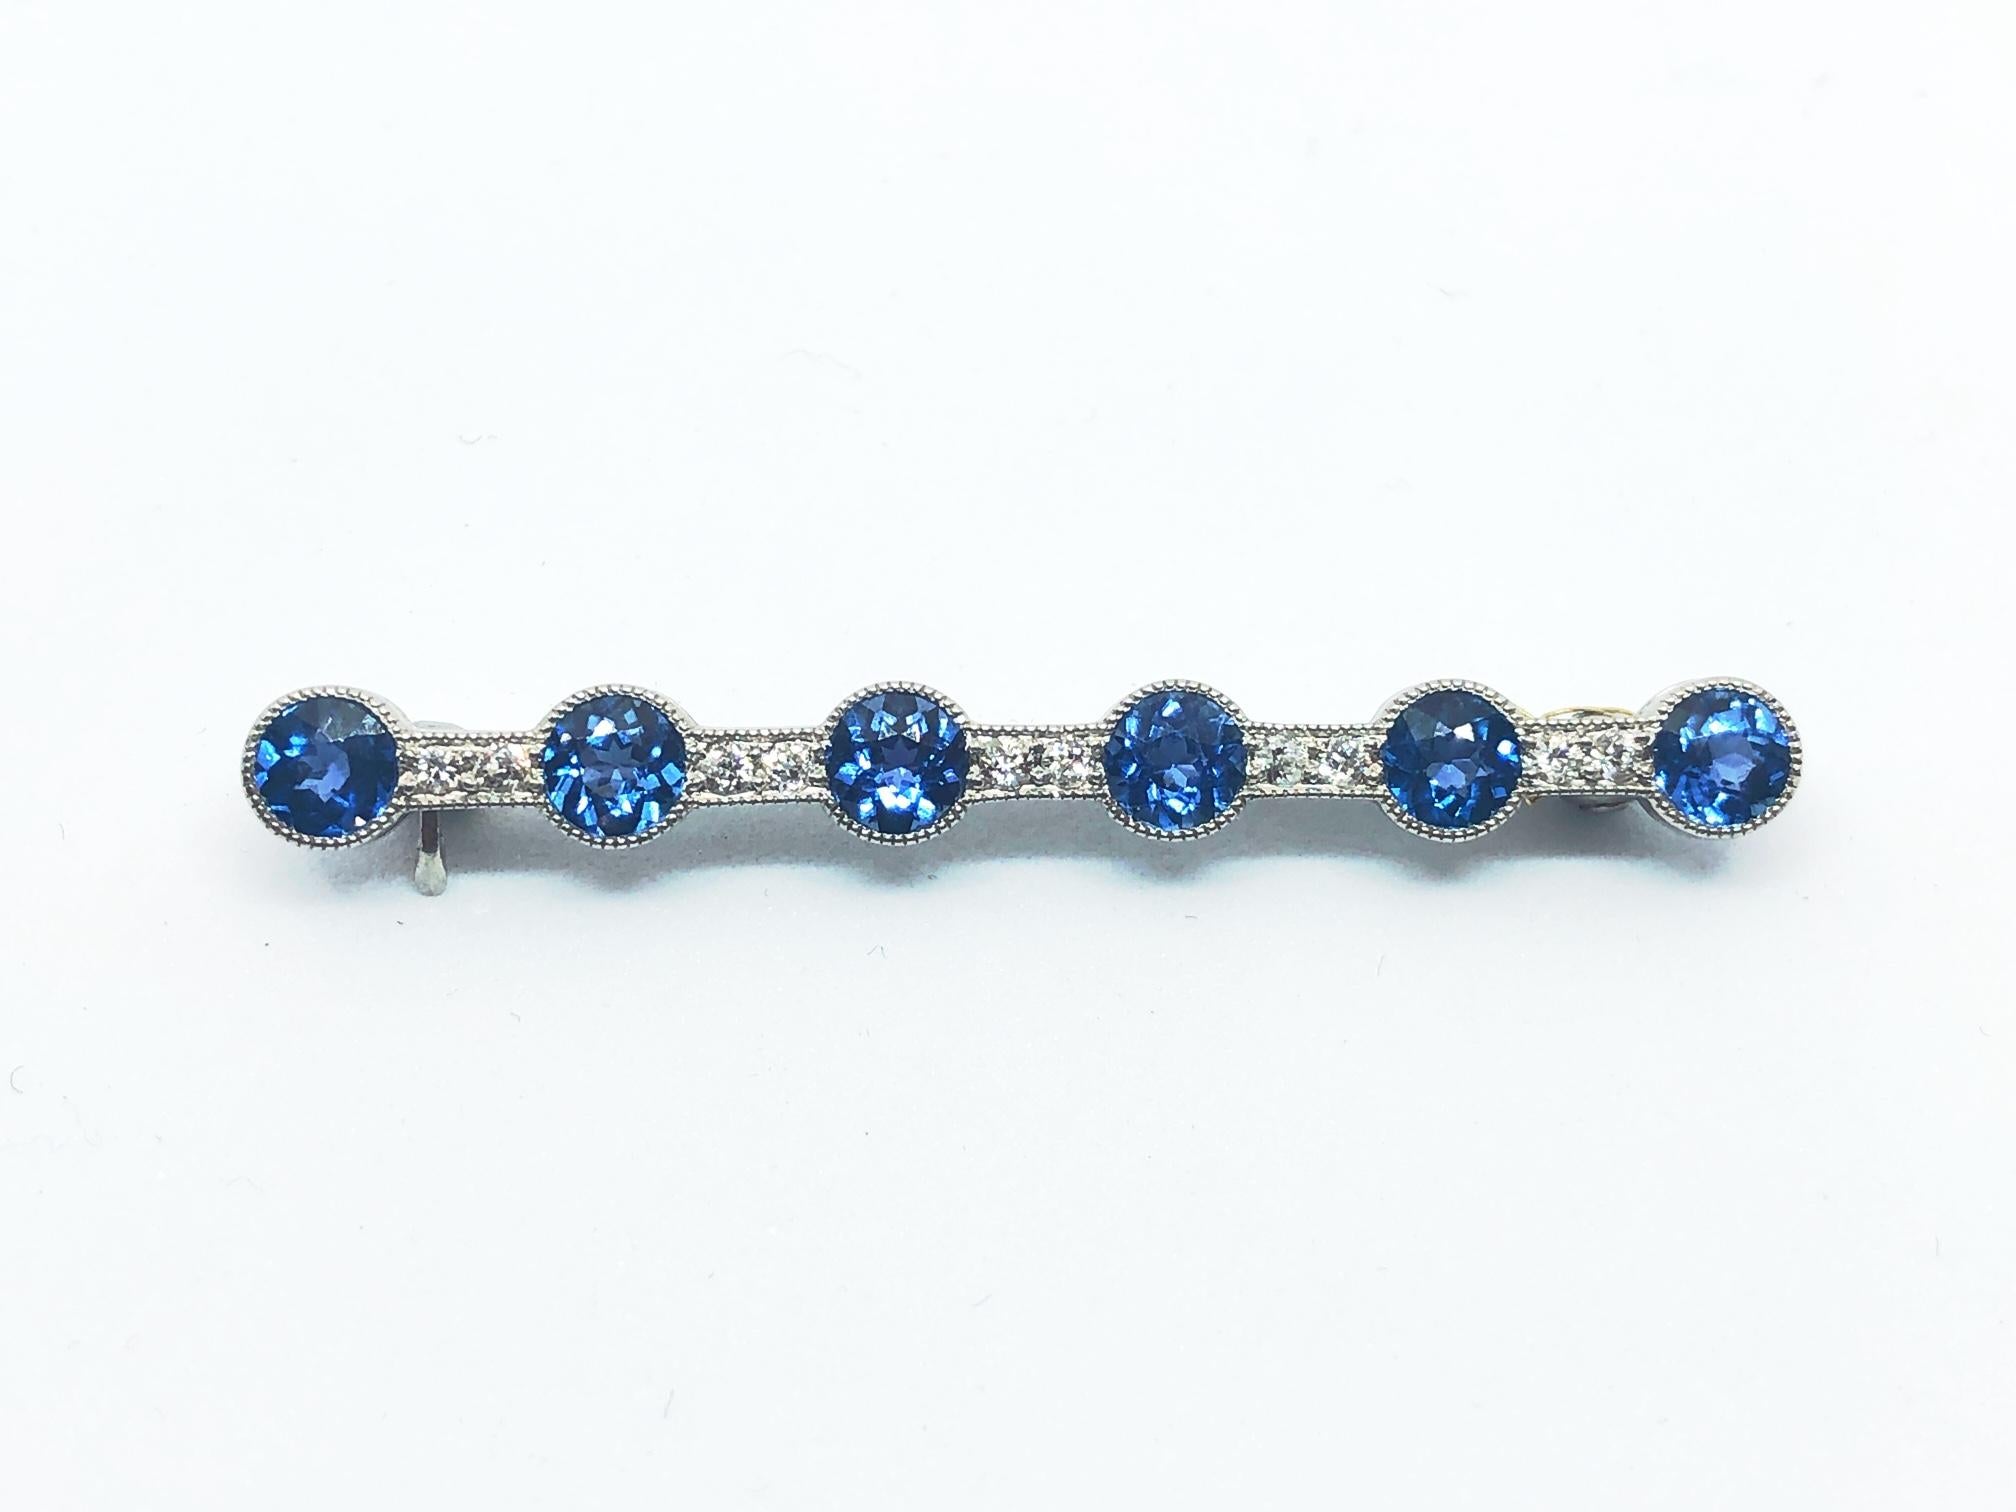 An Edwardian, Montana sapphire and diamond bar brooch, by D. D. Brokaw & Son, set with six round faceted Montana sapphires, with a total weight of approximately 2.70ct and ten old-cut diamonds, weighing approximately 0.26ct, mounted in platinum,